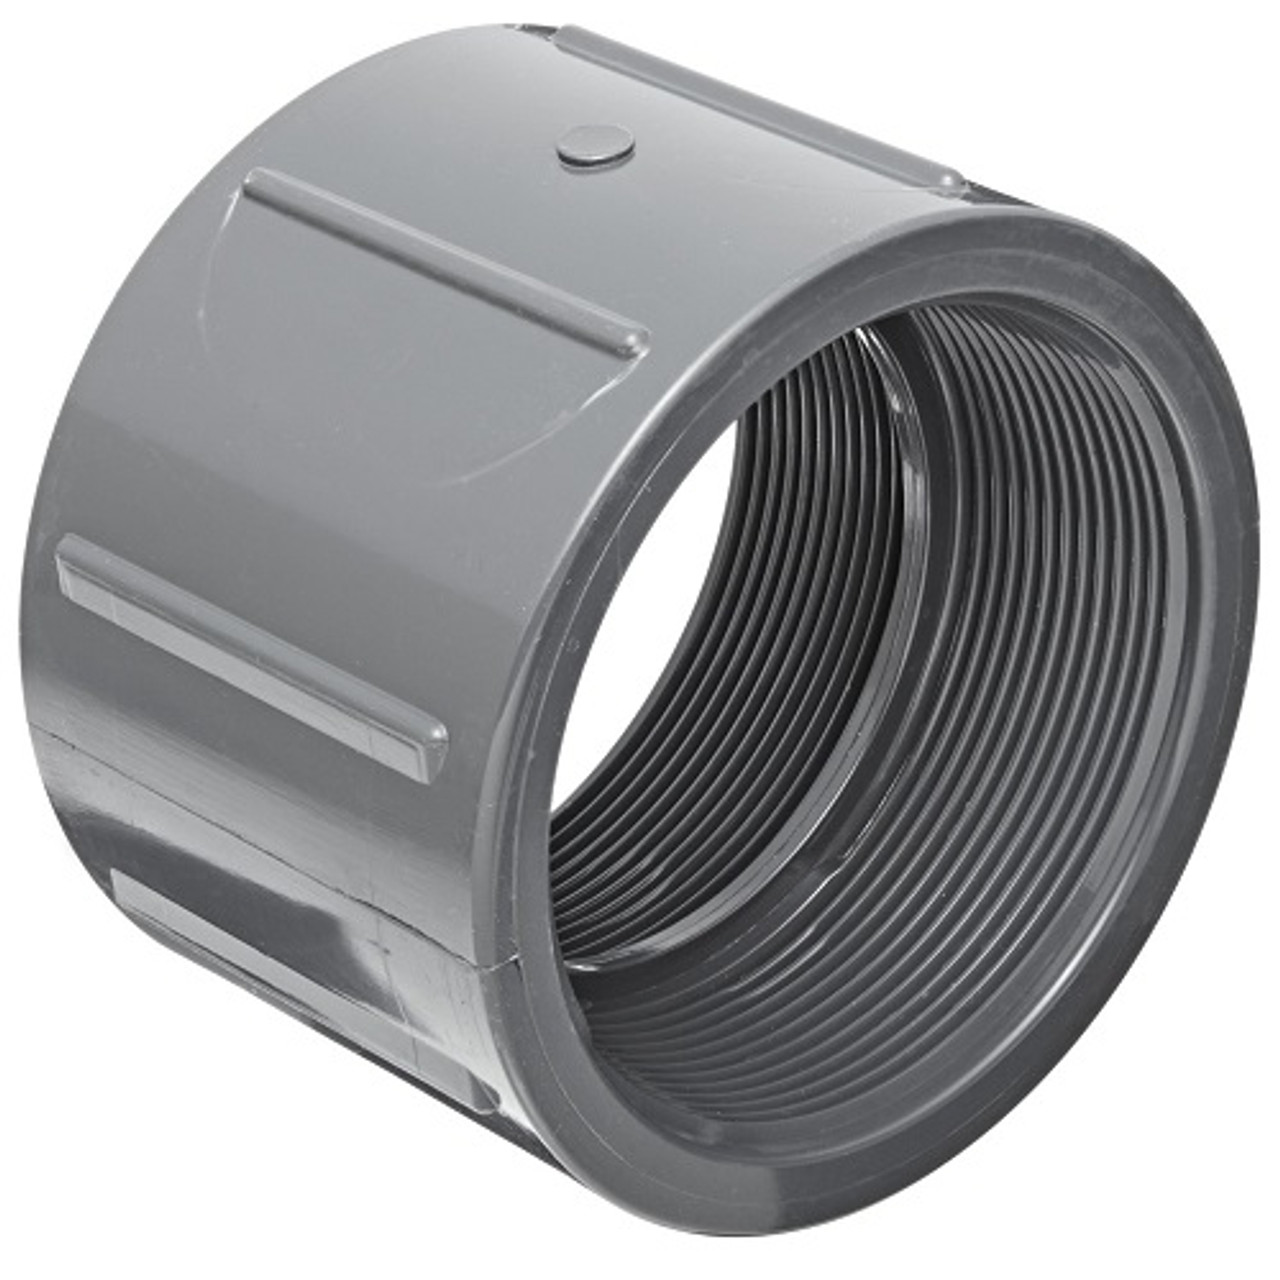 1 1/2" PVC Schedule 80 Coupling (FPT x FPT) - The Drainage Products Store